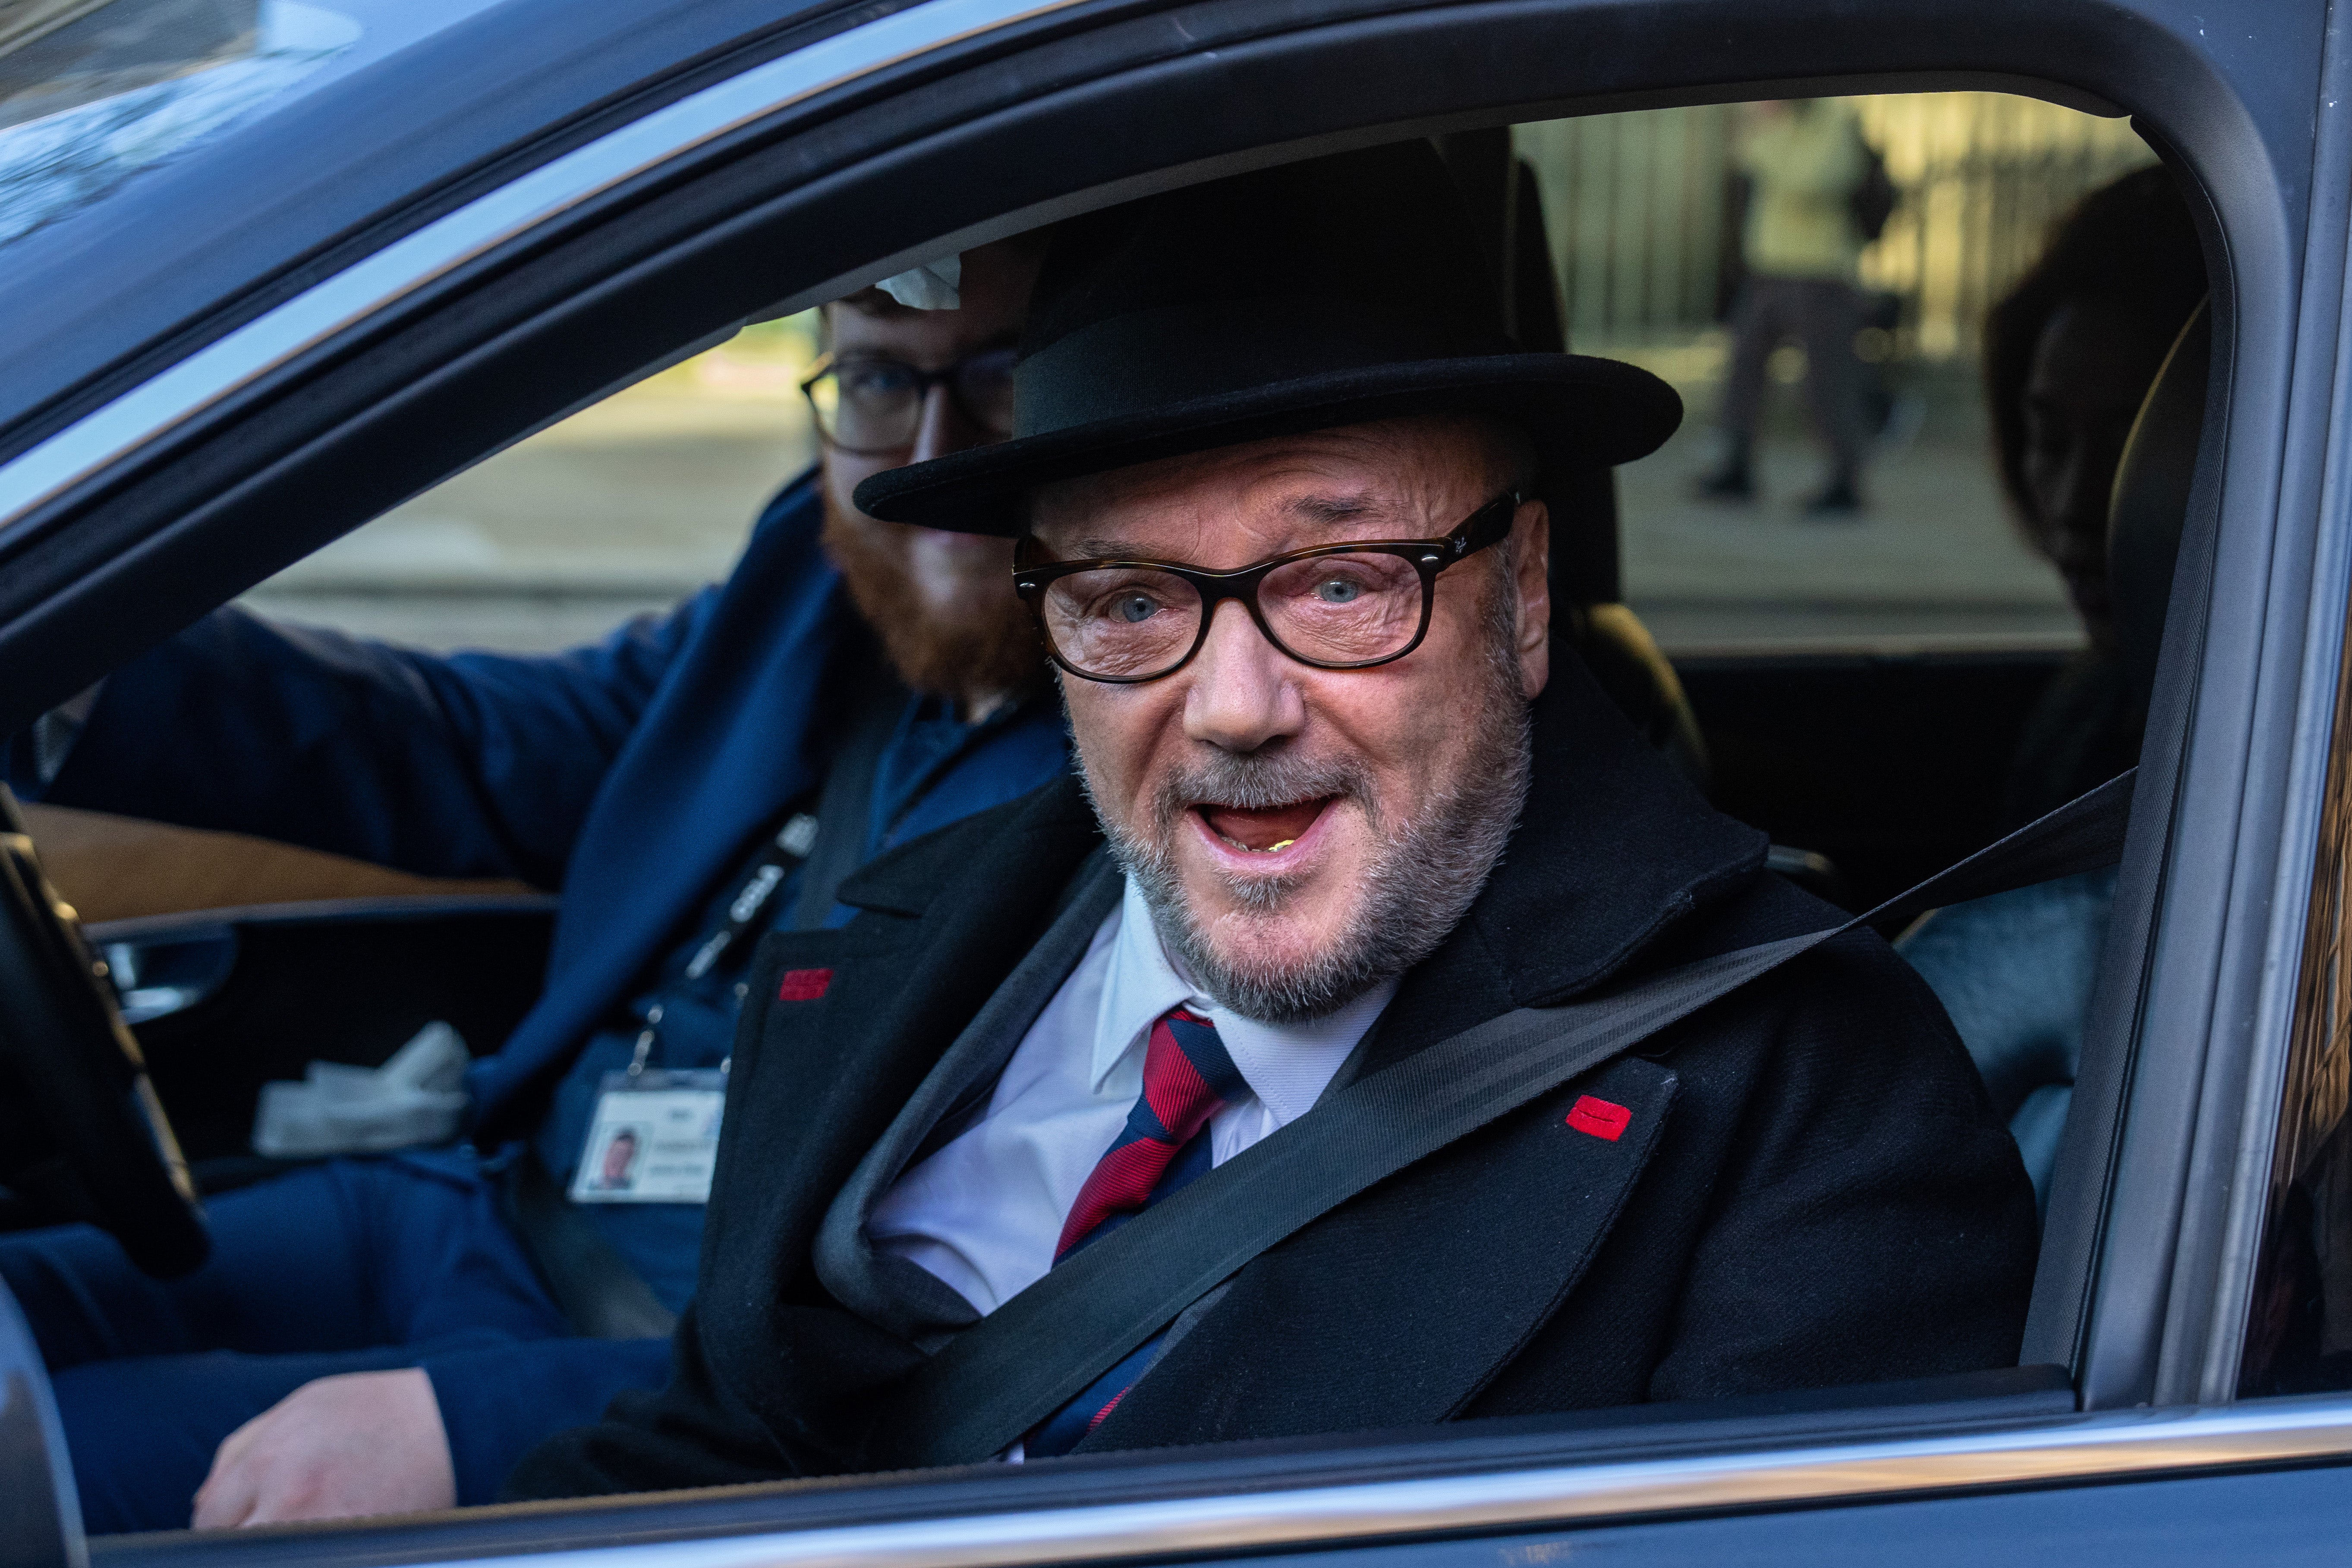 Never one to miss an opportunity for making noise, George Galloway is liable to be a turbulent addition to the parliamentary estate